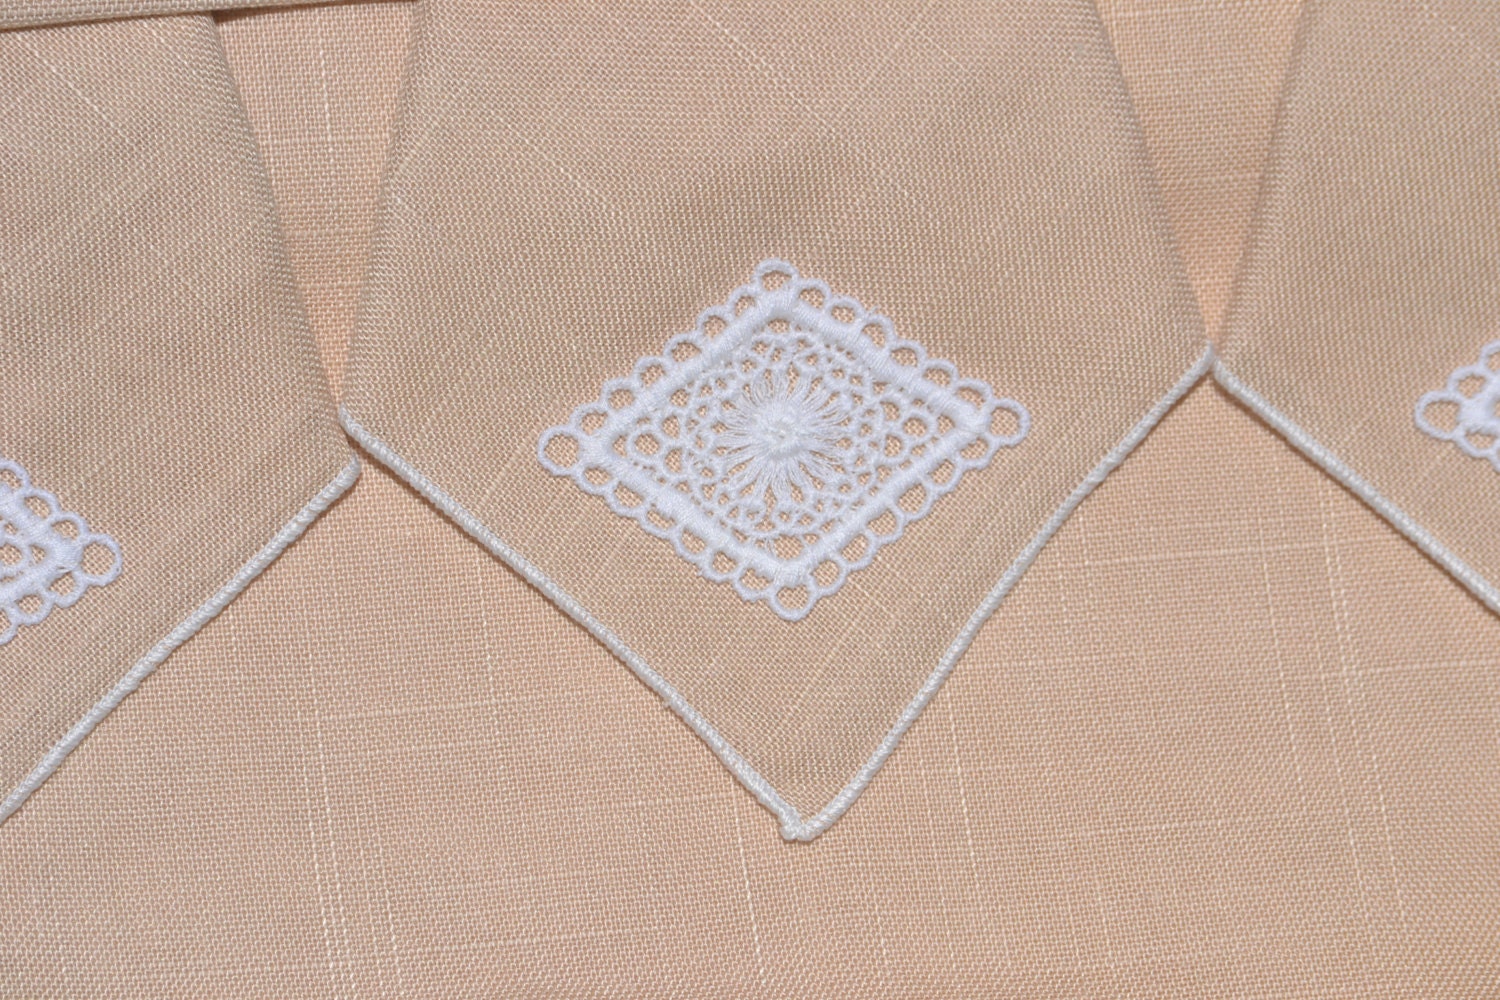 Vintage 1950s Shabby Chic Table Cloth 4 Matching Napkins Etsy